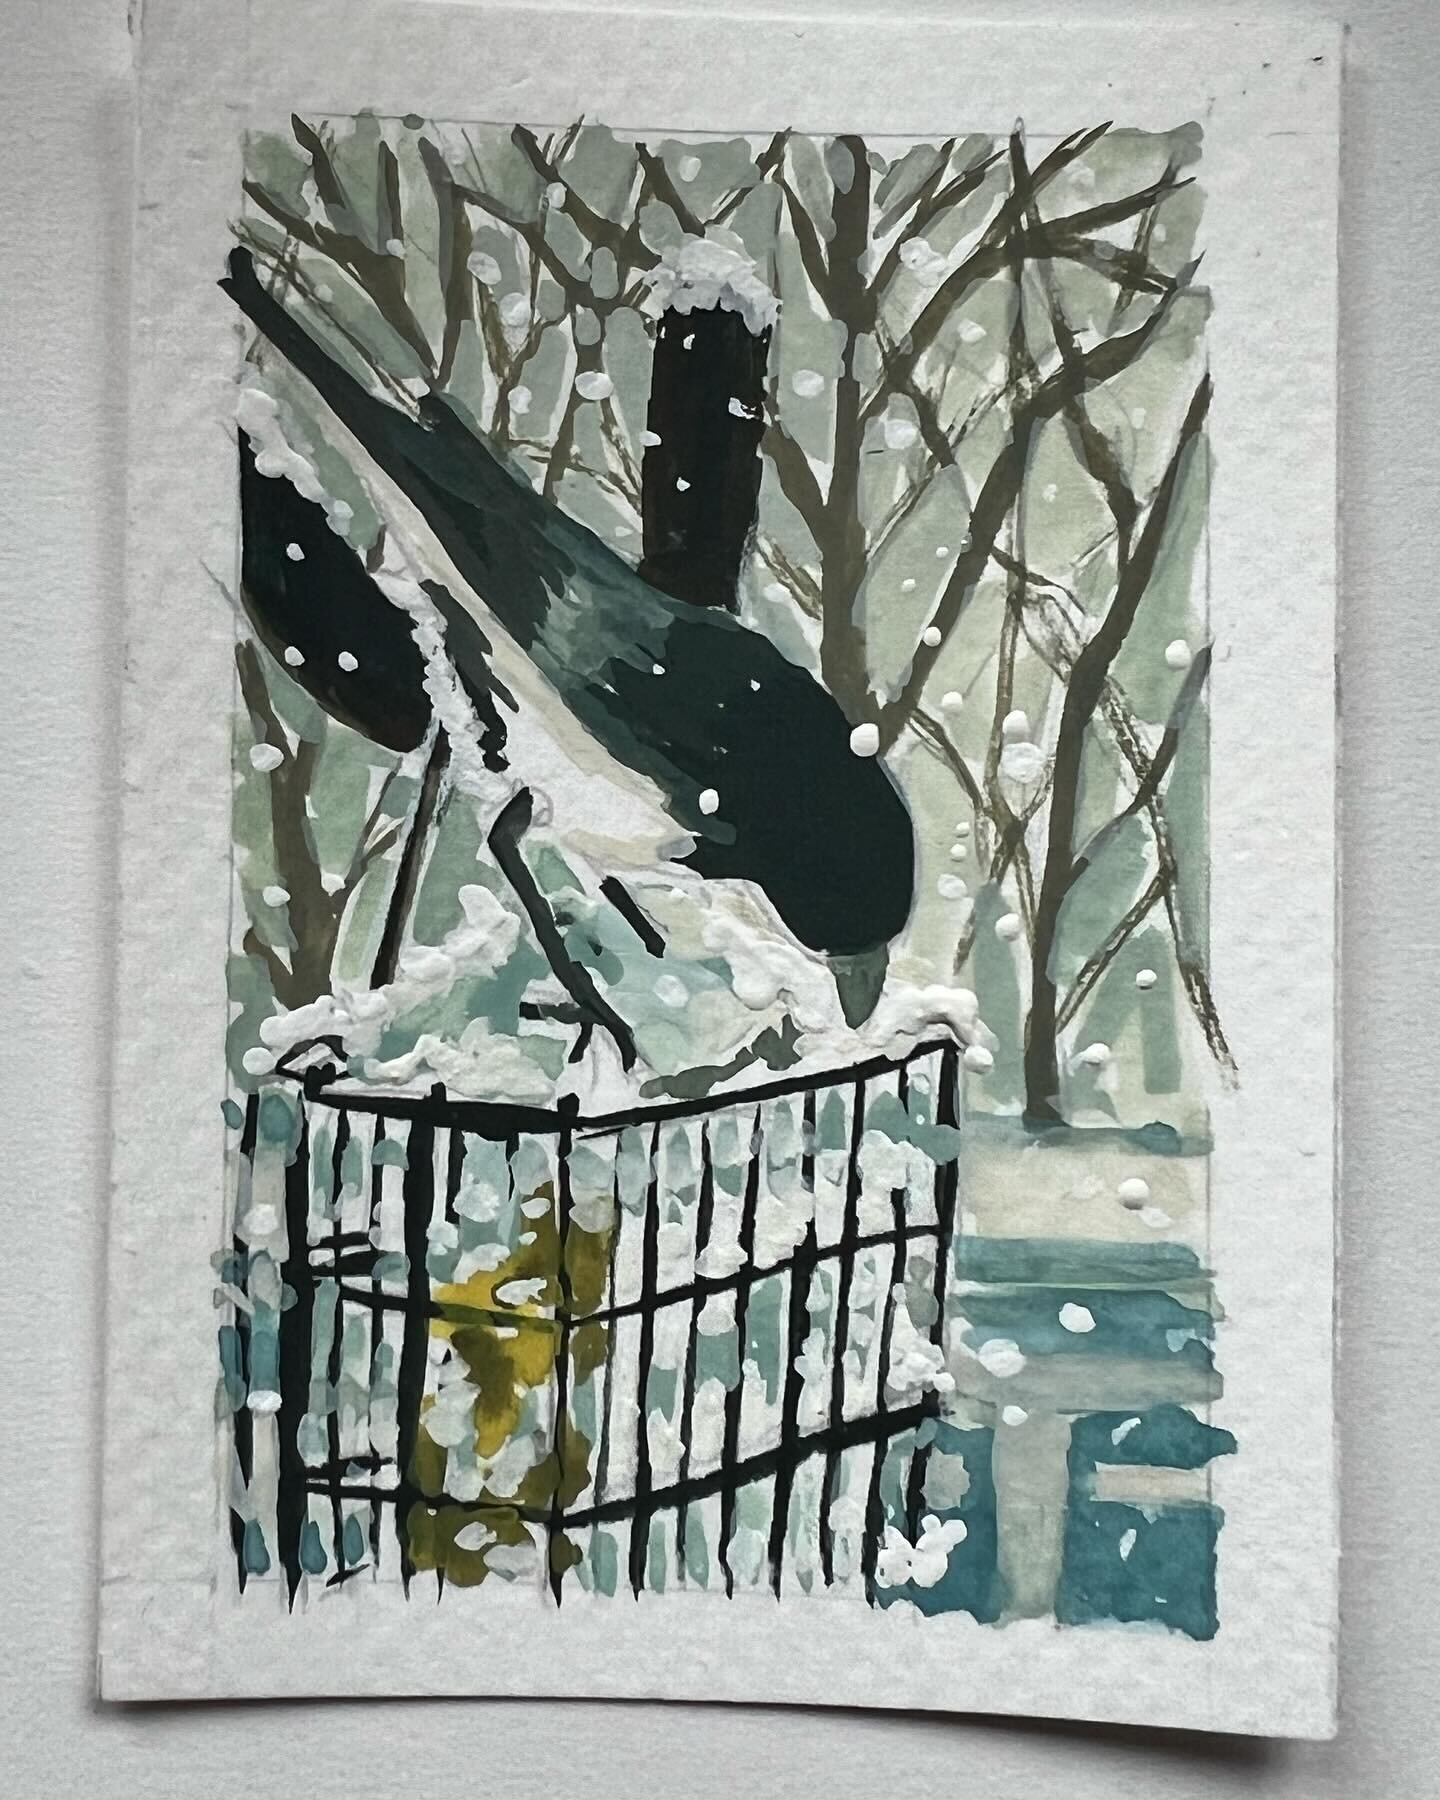 This little ATC was painted from a photo @foamchick shared during the last big snow fall. 
Flew off to a fellow artist as part of the ATC group in The @justin_donaldson_art Community on discord. 

This was super fun to paint and so glad to have parti